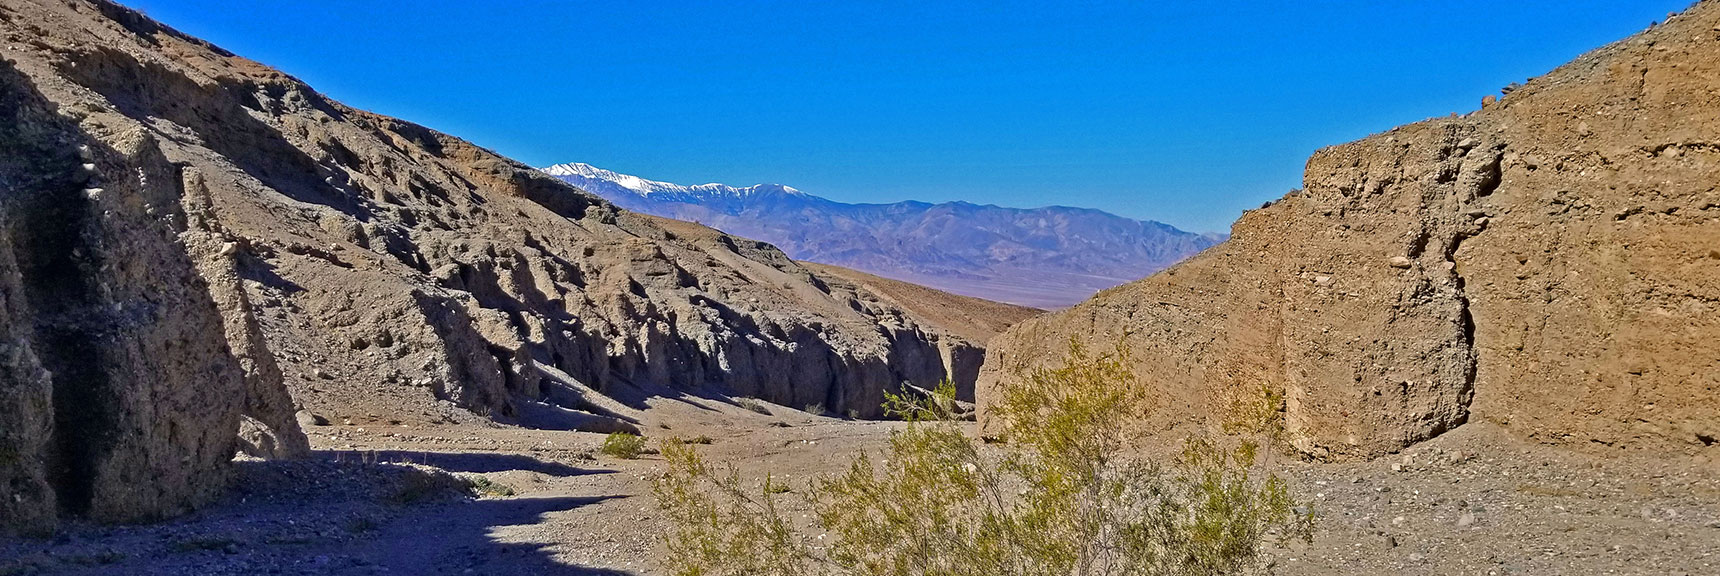 Back in Main Canyon Looking Toward Death Valley and Panamint Range | Sidewinder Canyon | Death Valley National Park, California